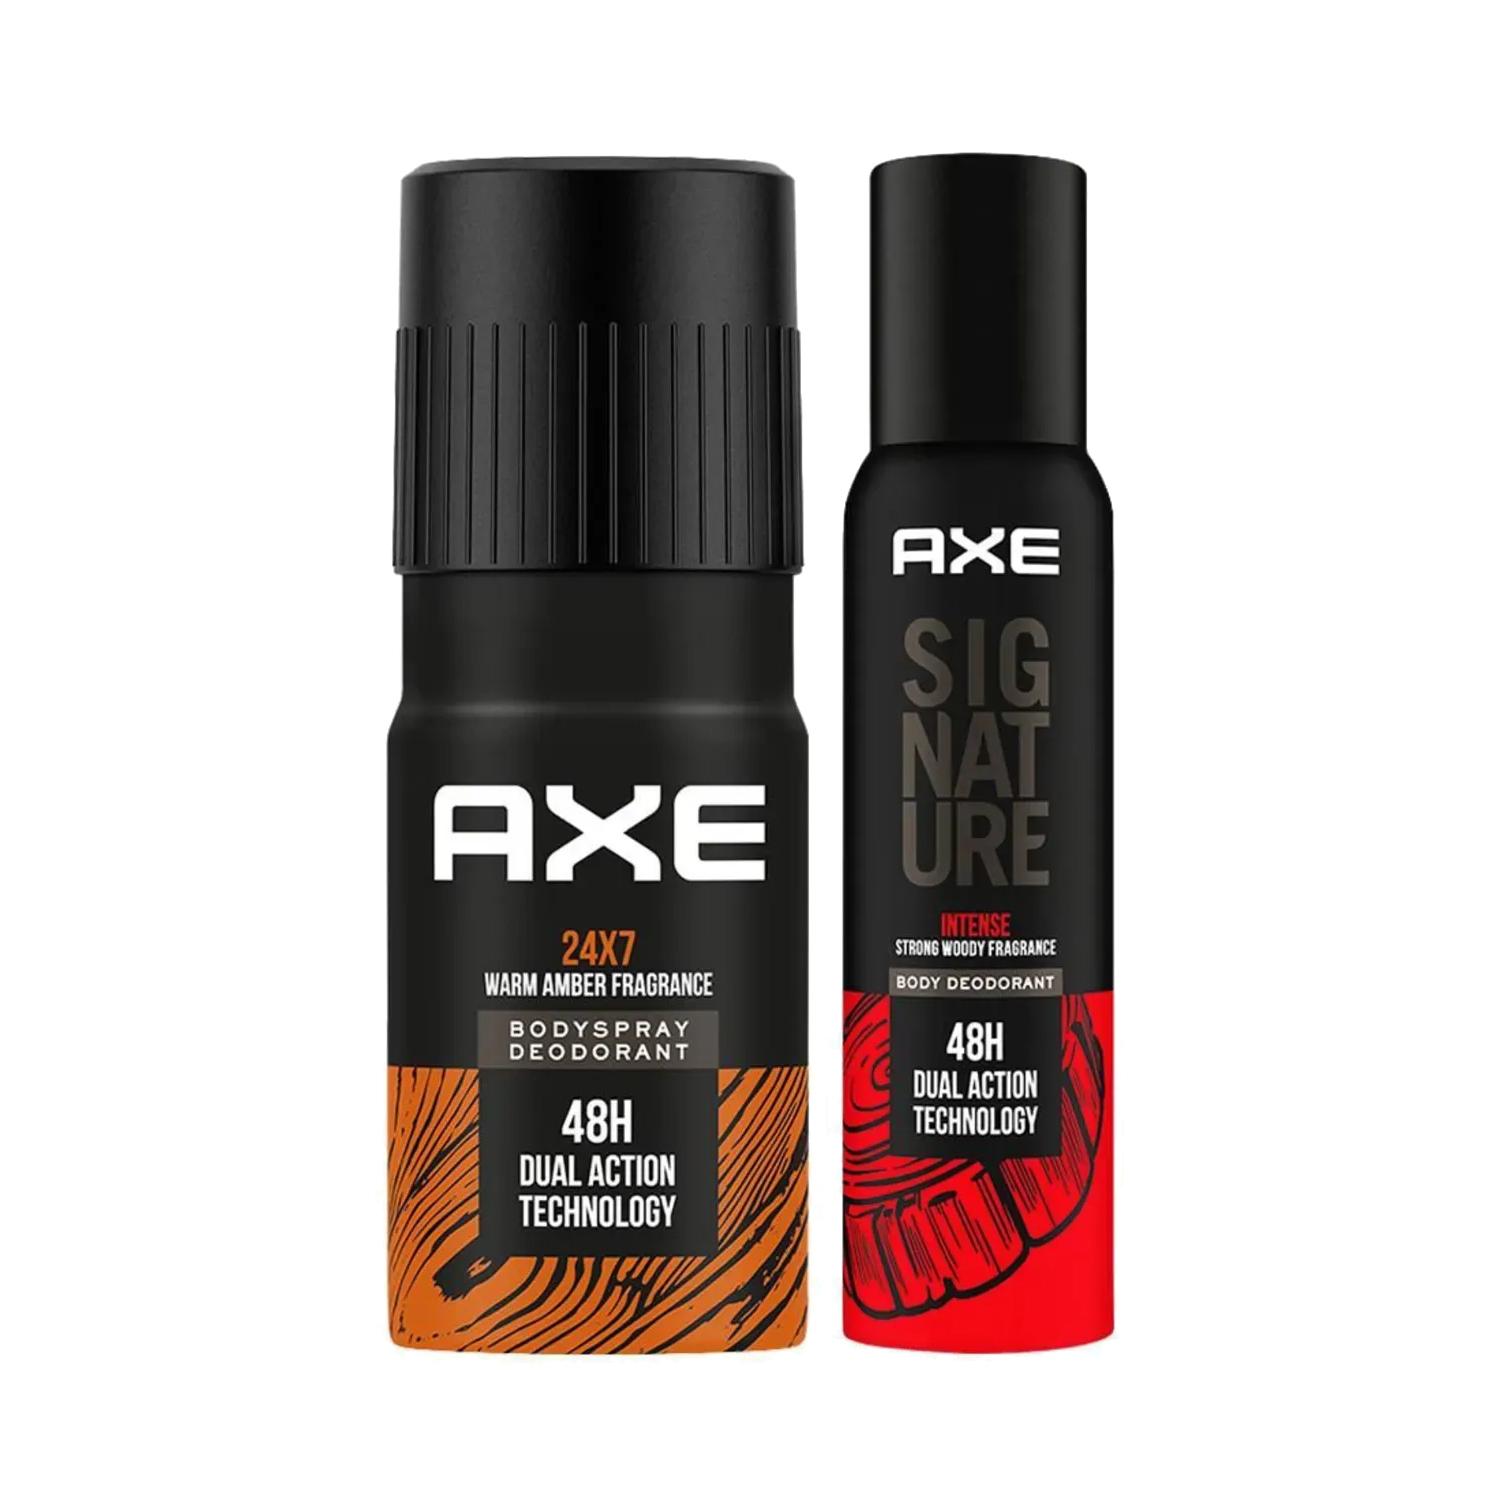 AXE | AXE 24X7 Warm Amber And Signature Intense Strong Woody Fragrance Deodorant Bodyspray 48H Combo